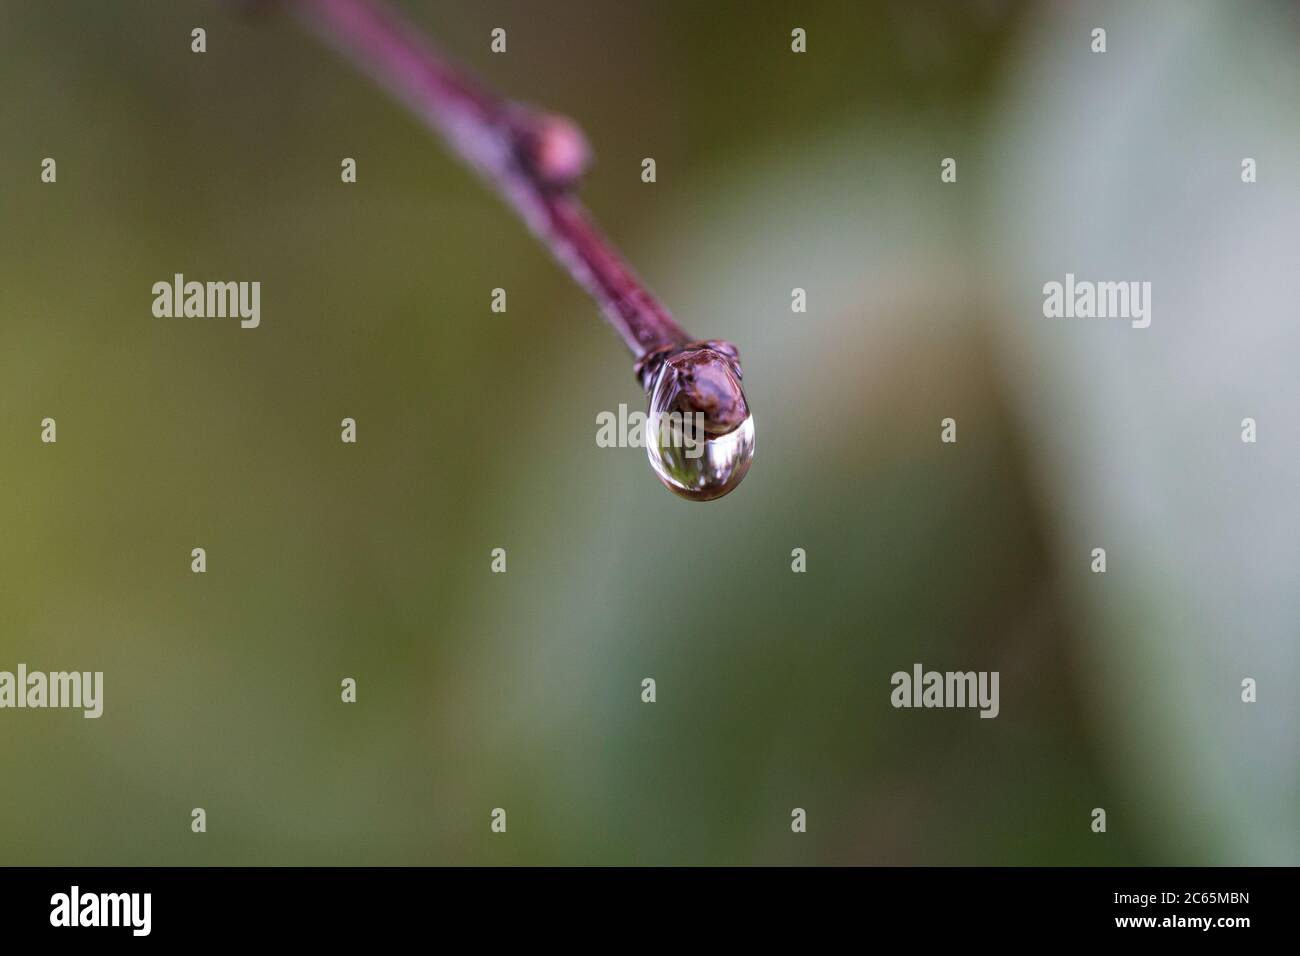 Macro closeup of outdoor nature, tree branches with raindrops Stock Photo